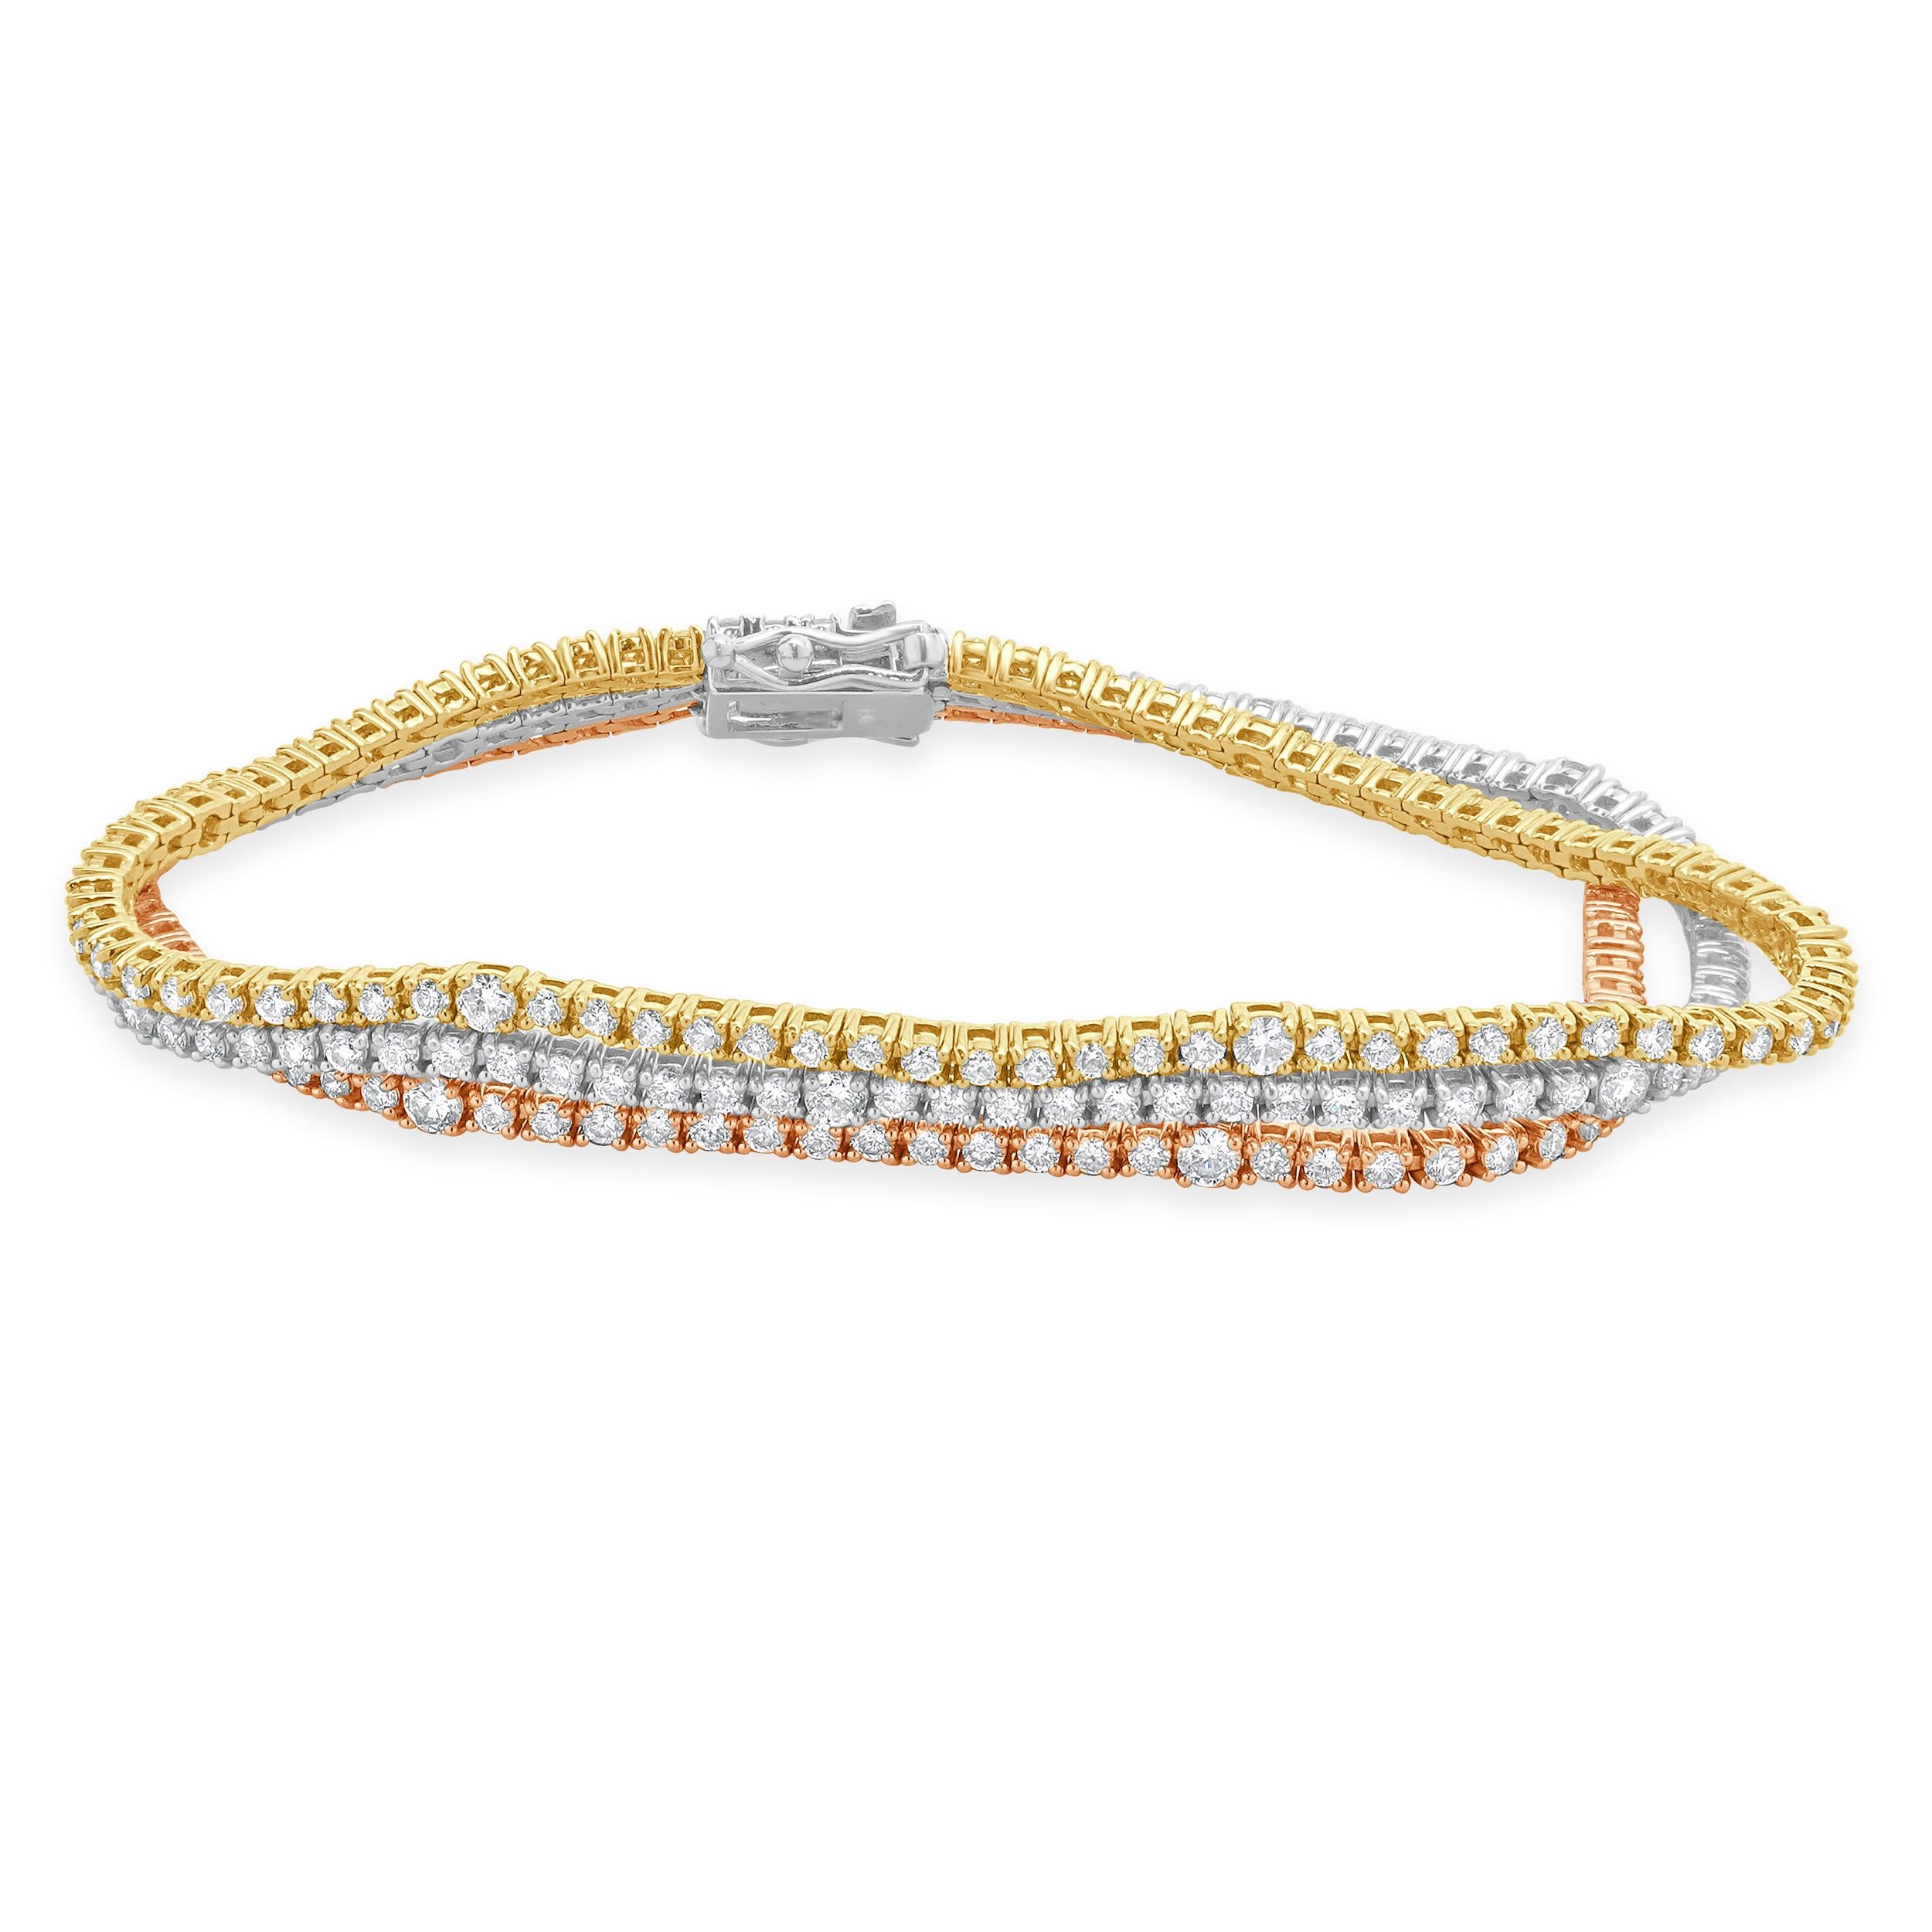 Designer: custom design
Material: 18K white, rose &  yellow gold
Diamond: 237 round brilliant cut = 5.31cttw
Color: G/H
Clarity: VS-SI1
Dimensions: bracelet will fit up to a 7-inch wrist
Weight: 20.80 grams
